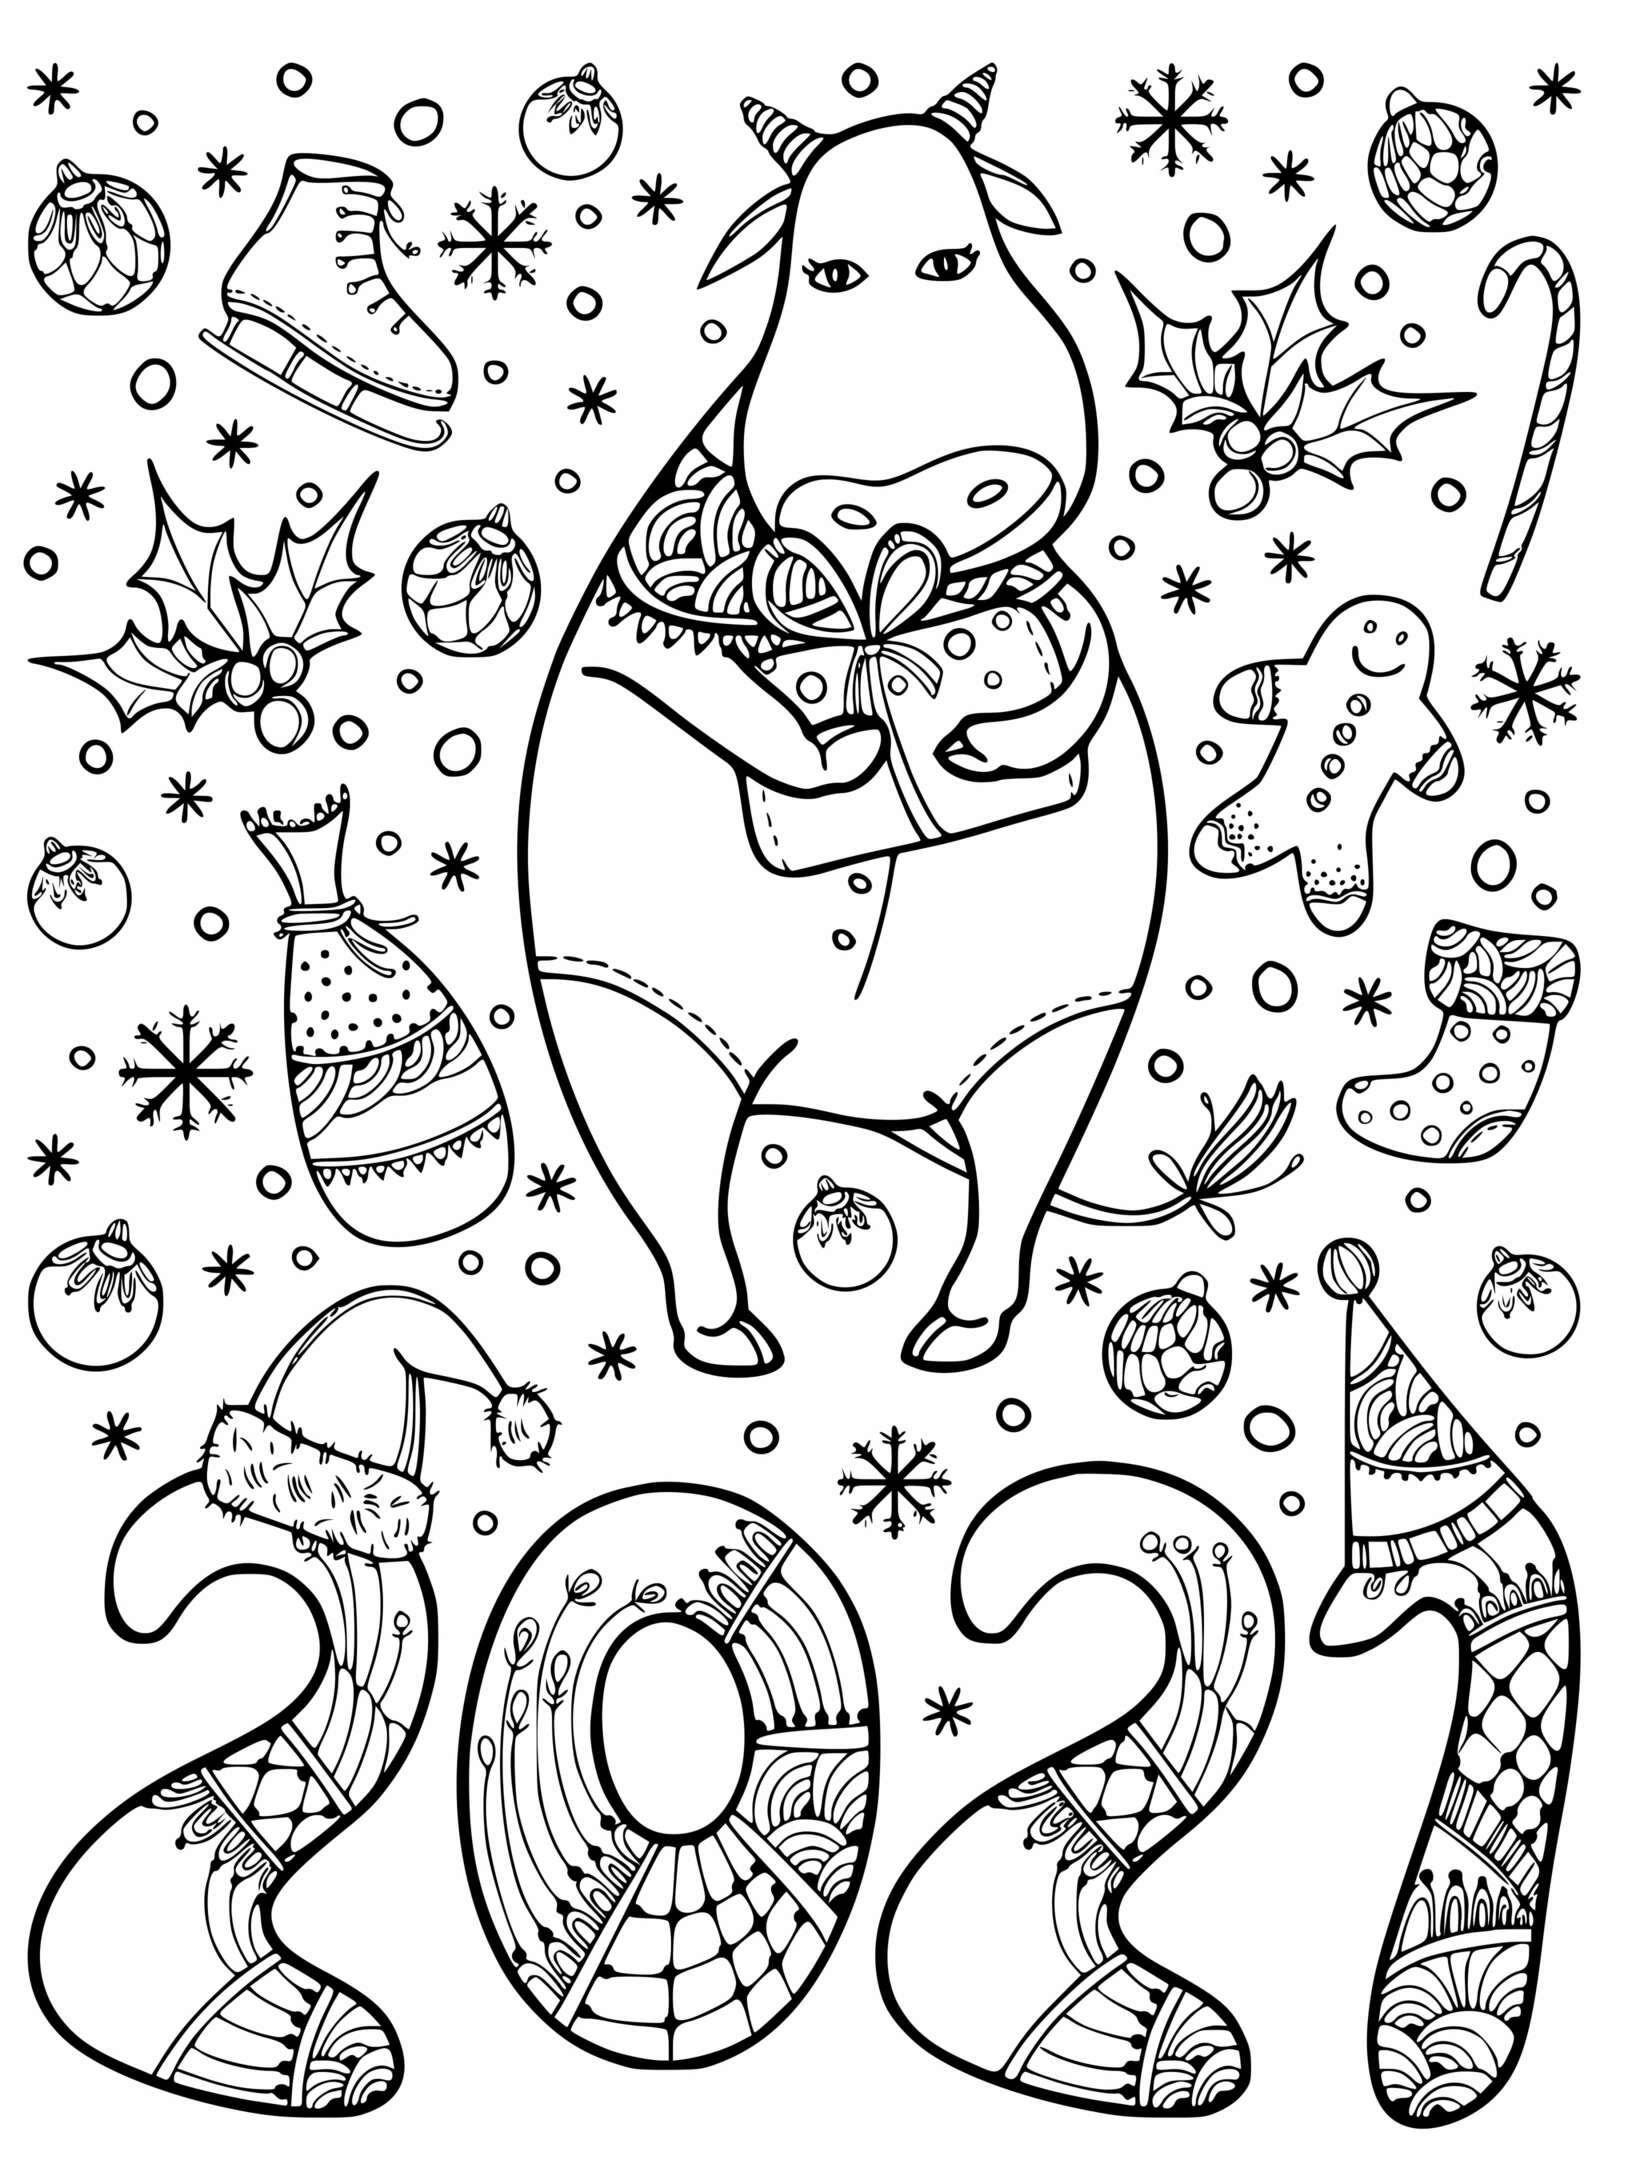 2021 Year Of The Bull New Year Coloring Page